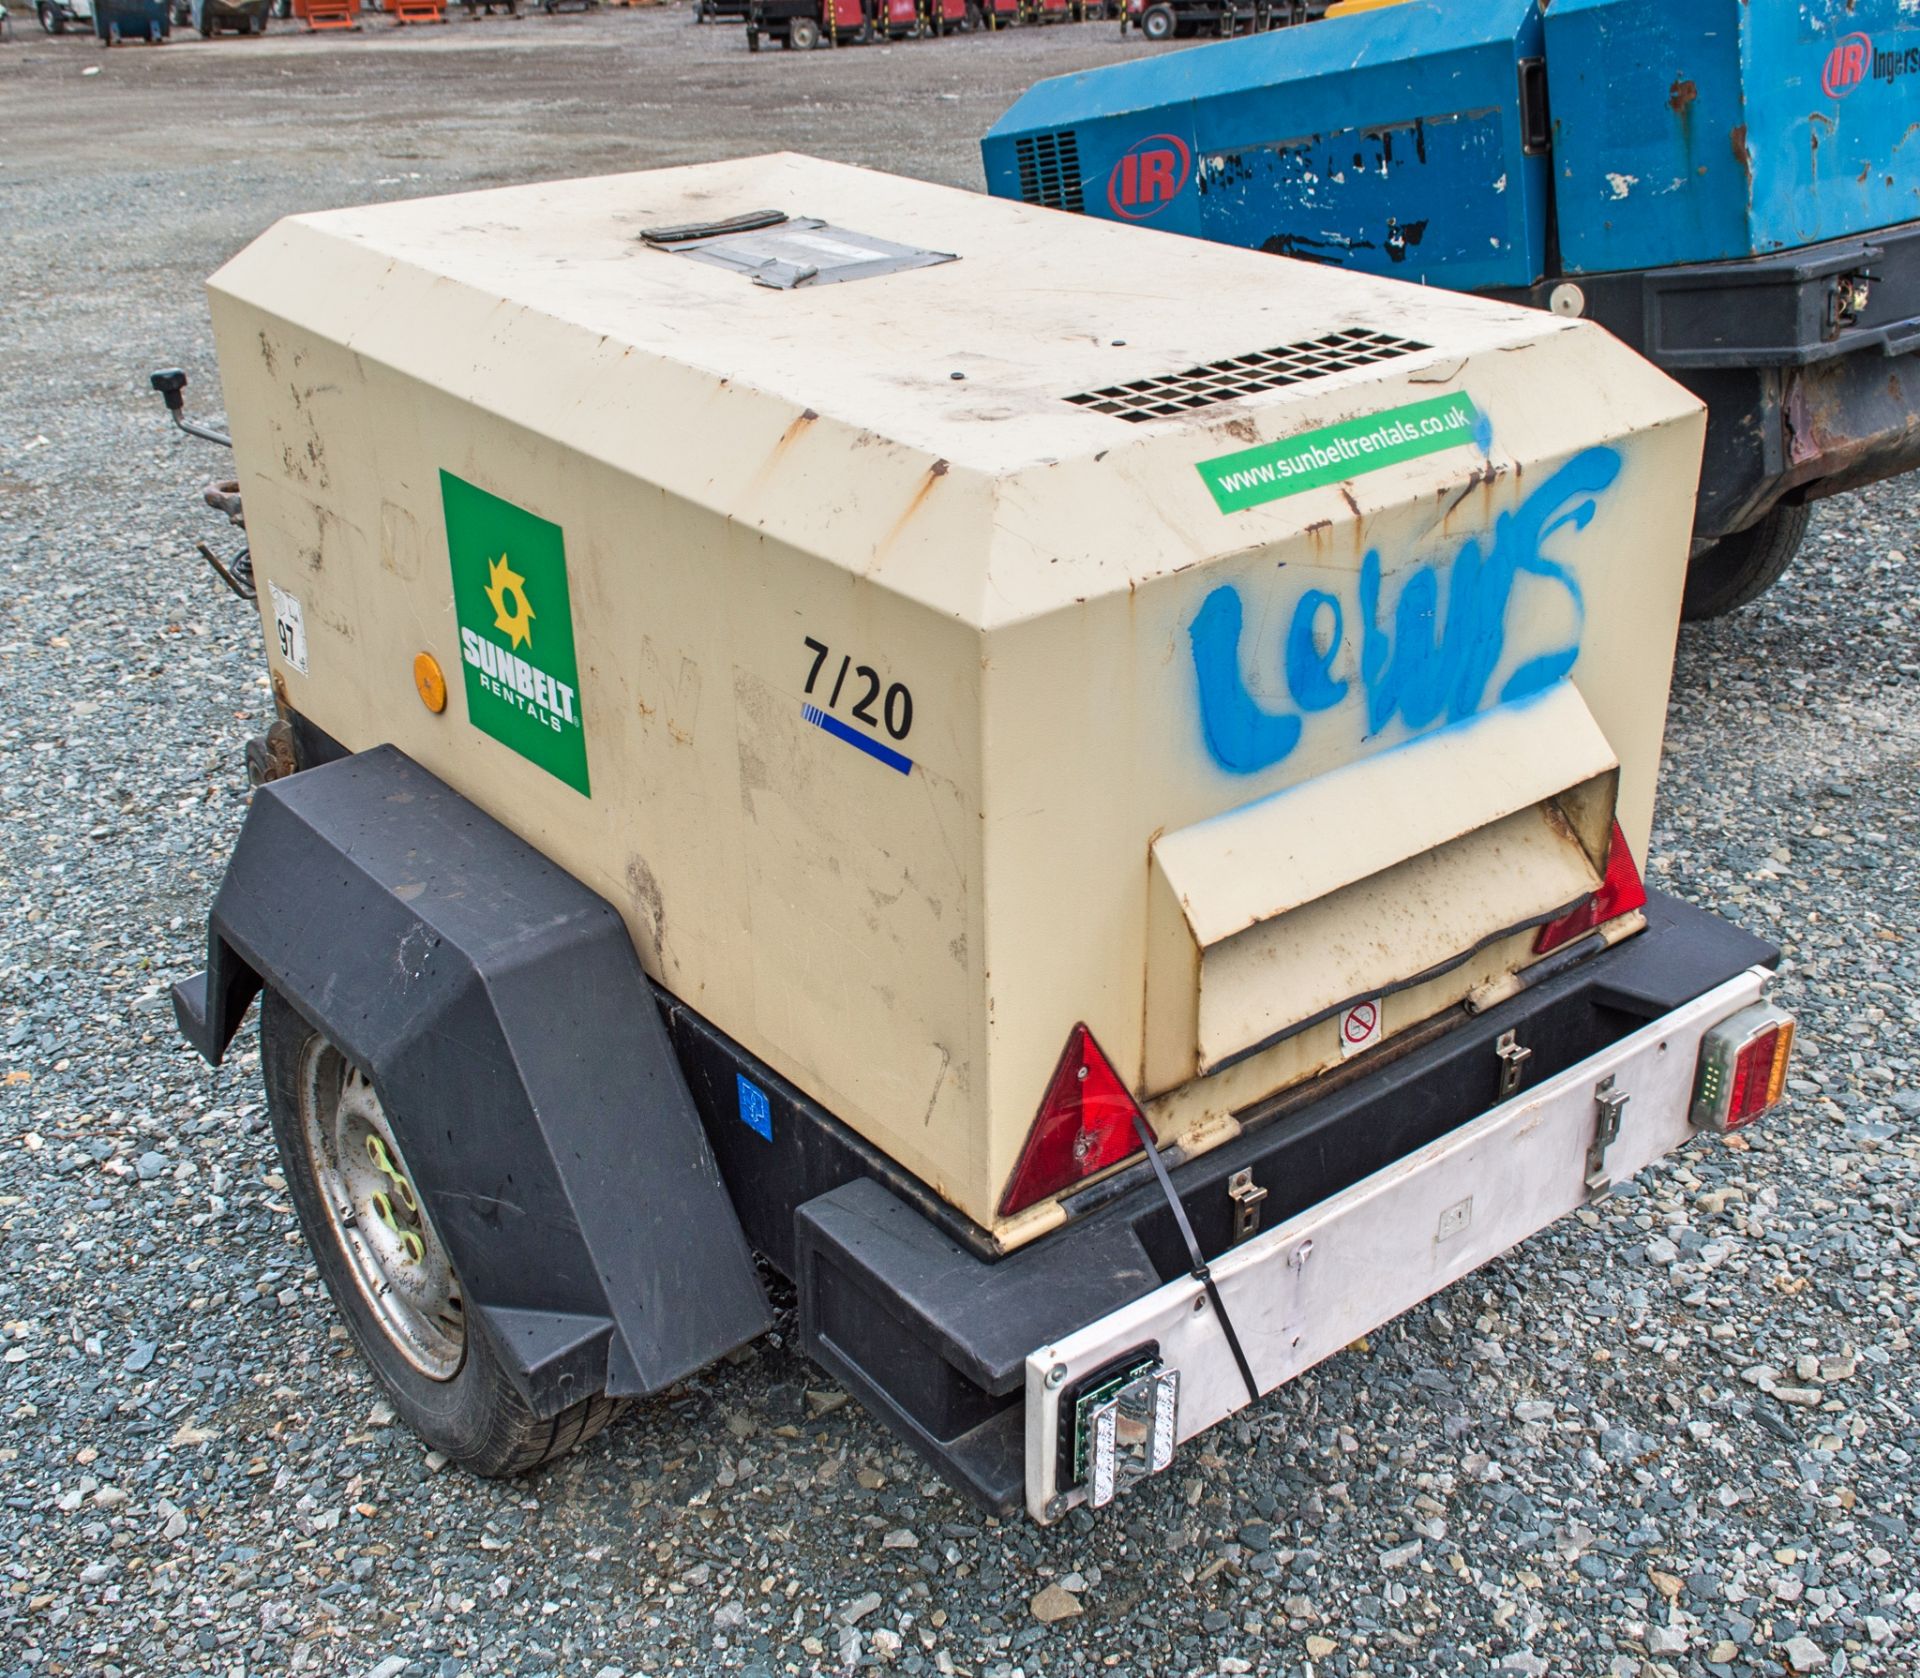 Doosan 7/20 diesel driven mobile air compressor Year: 2013 S/N: 123680 Recorded Hours: 471 A602605 - Image 2 of 4